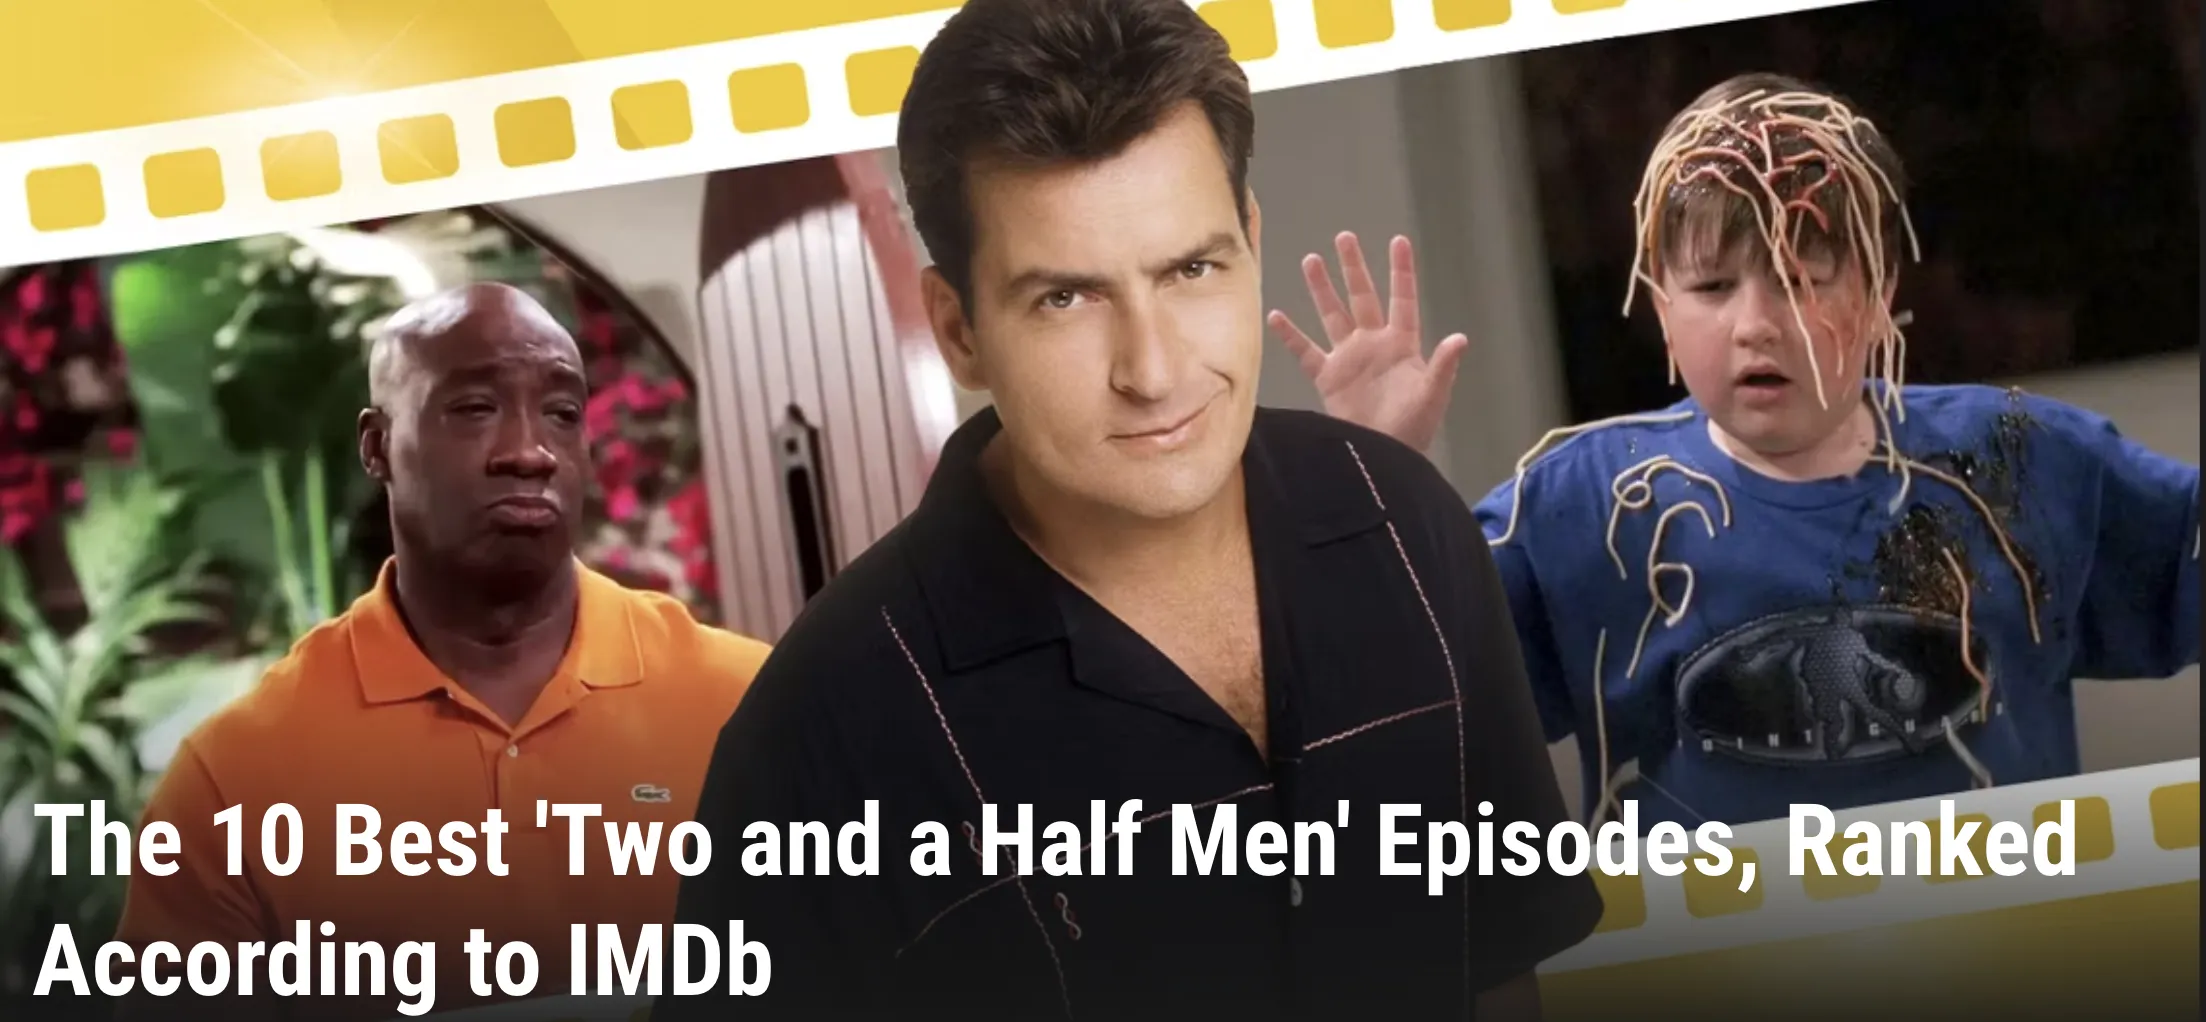 The 10 Best 'Two and a Half Men' Episodes, Ranked According to IMDb